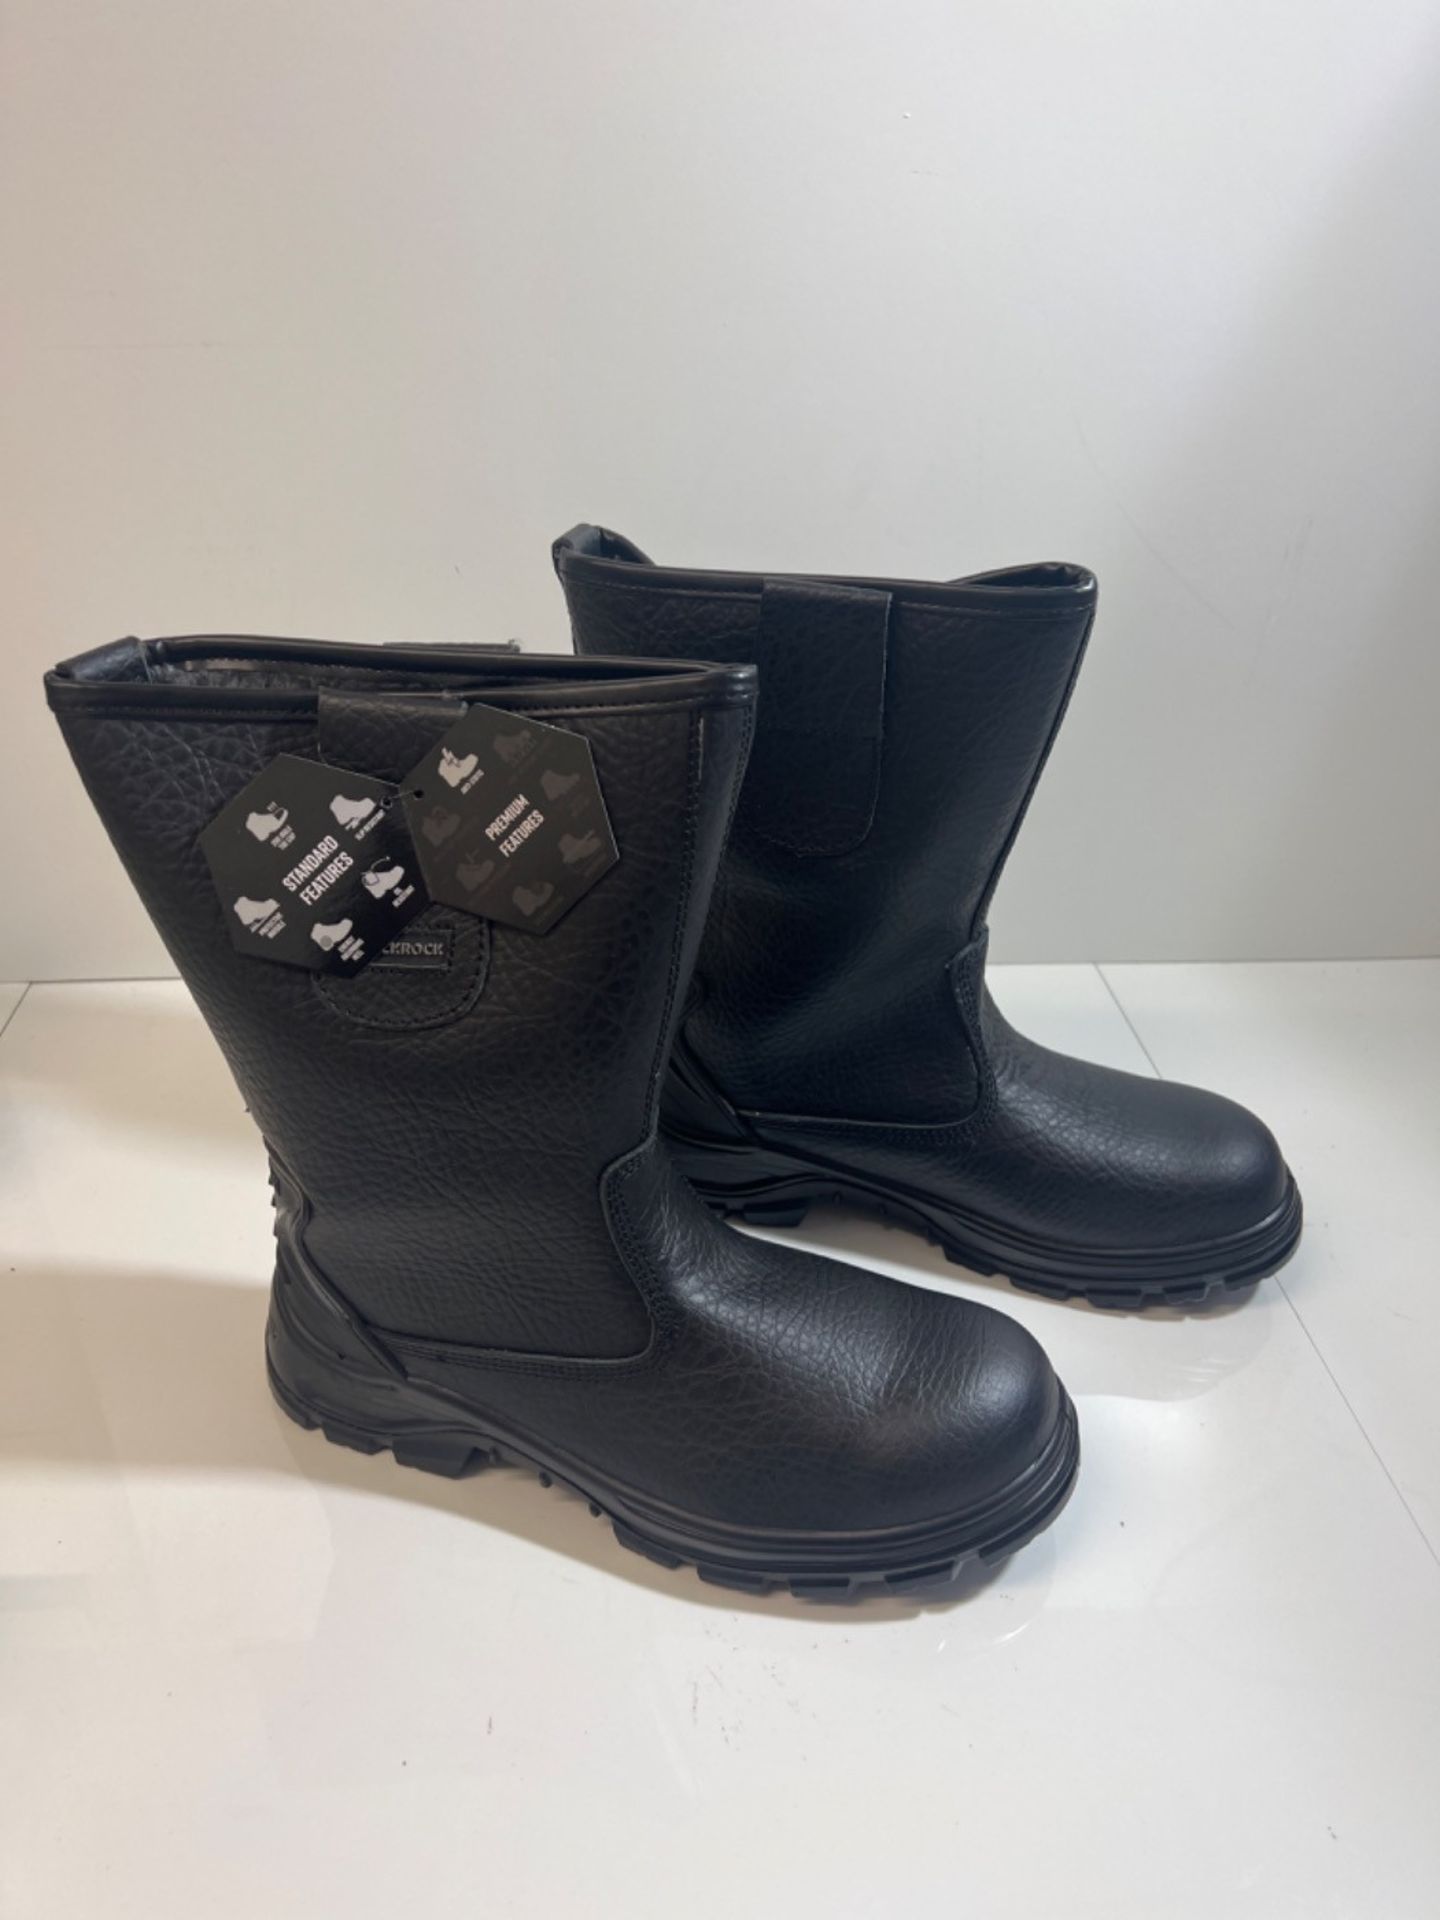 Blackrock S1-P SRC Safety Rigger Work Boots, Mens Womens Steel Toe Cap Black Leather, Working Boots - Image 3 of 3